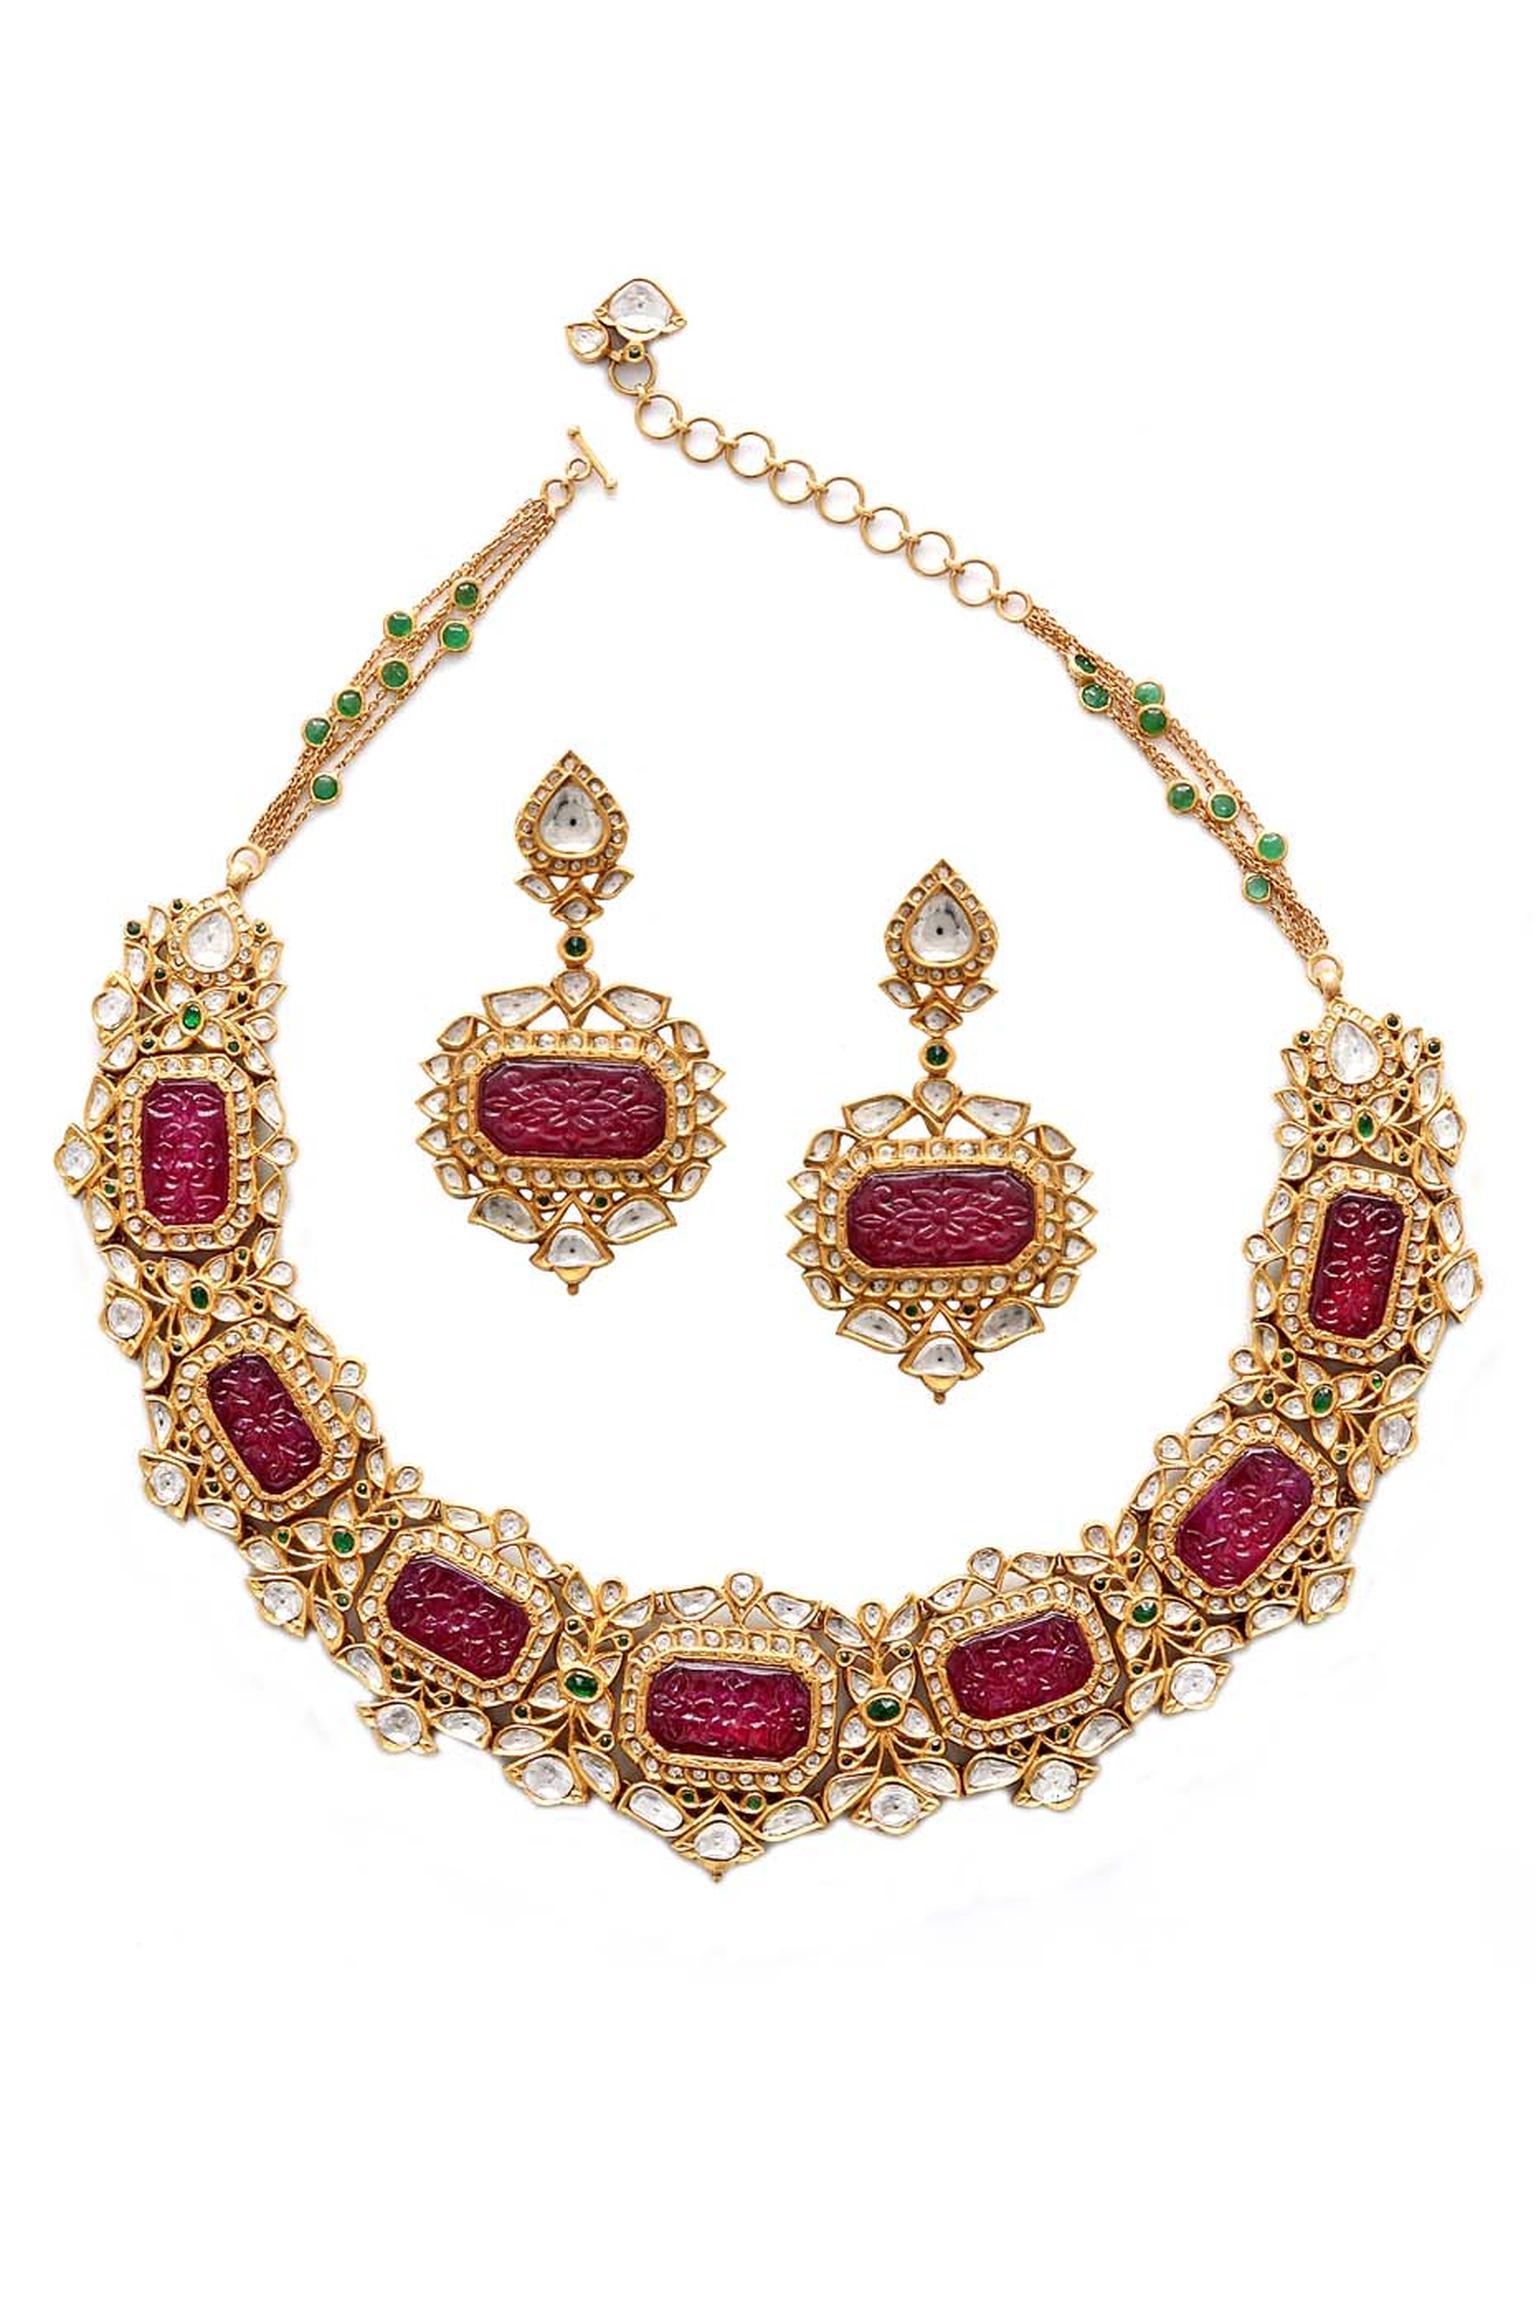 Amrapali gold necklace and earrings set with carved rubies and diamonds.